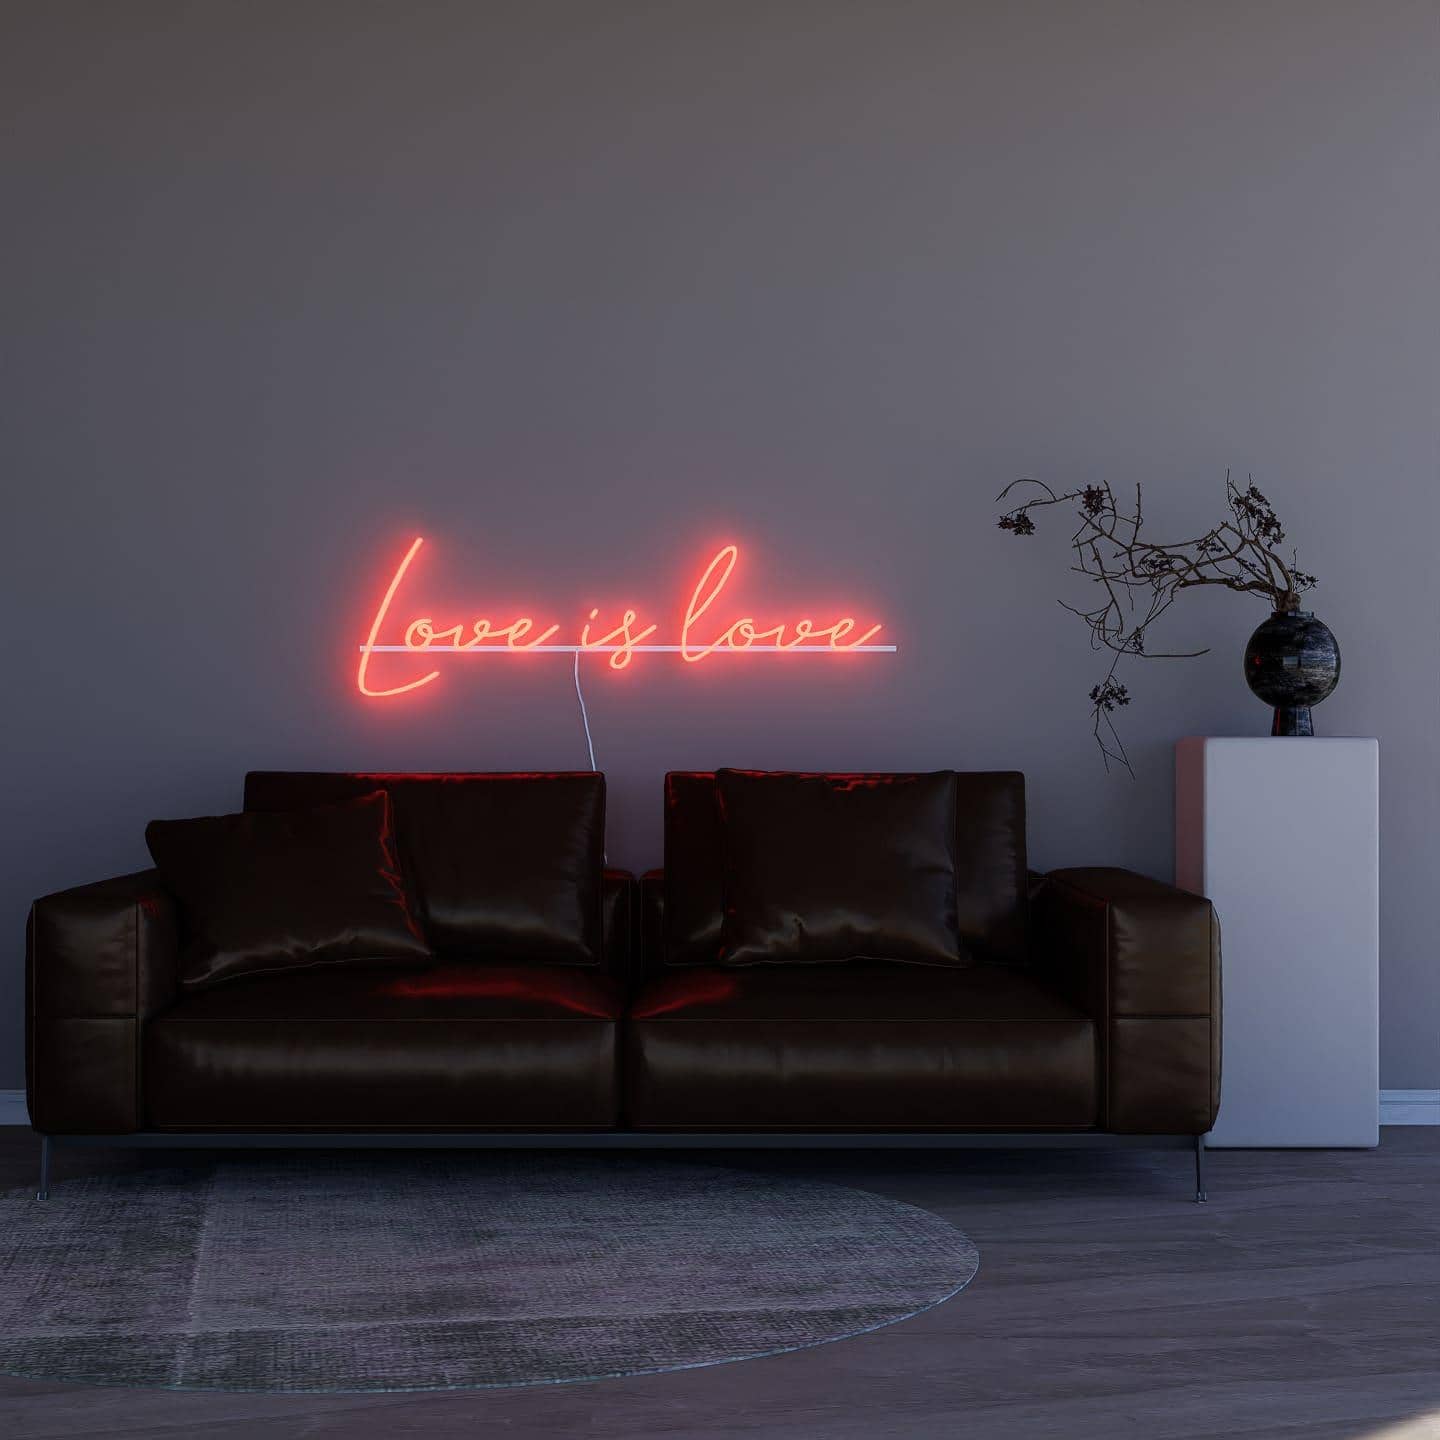 dark-night-shot-with-lit-red-neon-lights-hanging-on-the-wall-for-display-love-is-love